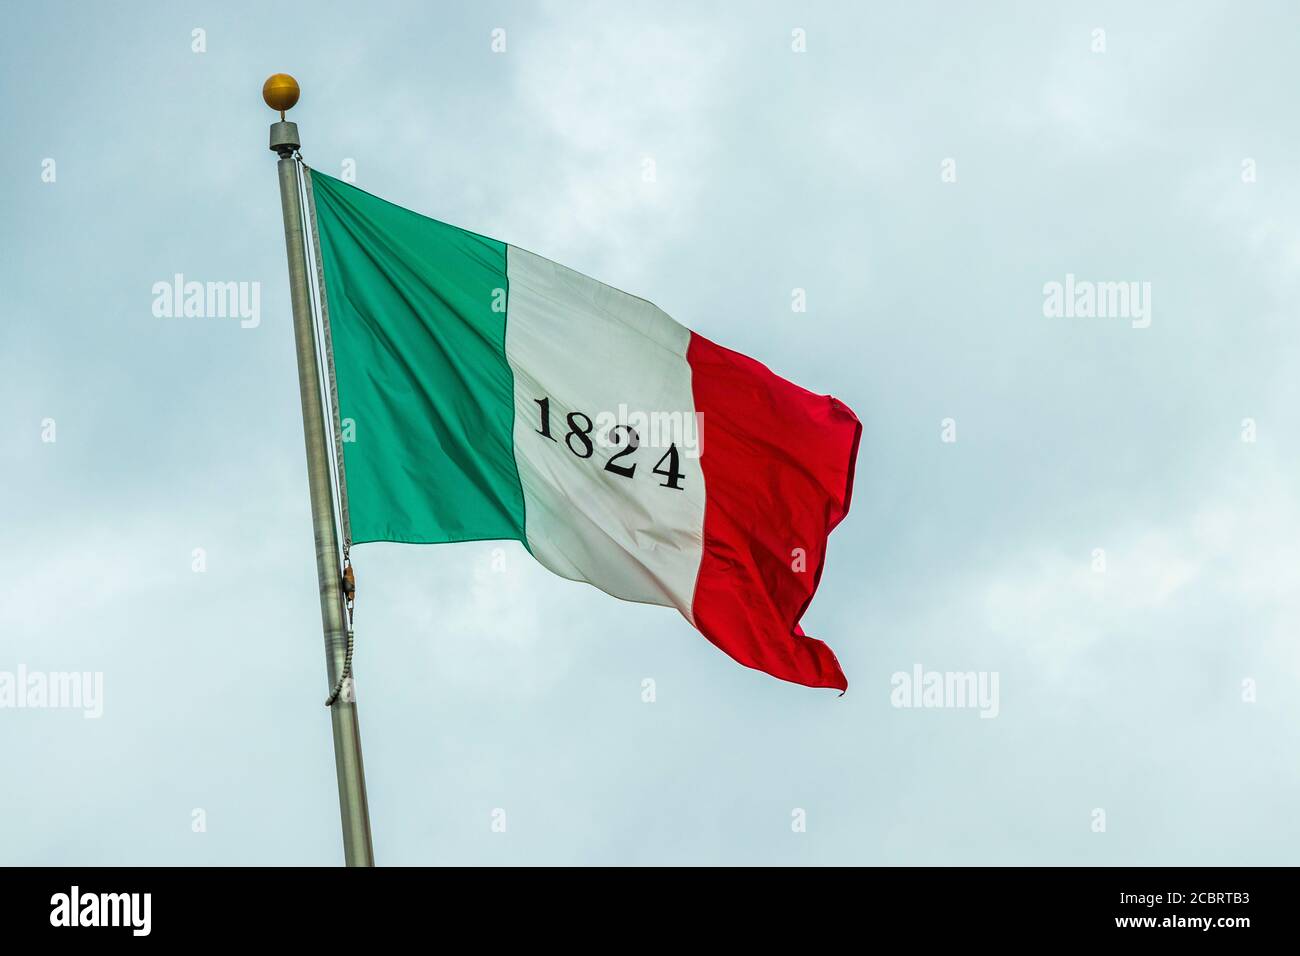 The Alamo Flag, from the Texas Revolution Alamo battle, at Lone Star Monument and Historical Flag Park at Conroe, Montgomery County, Texas. Stock Photo